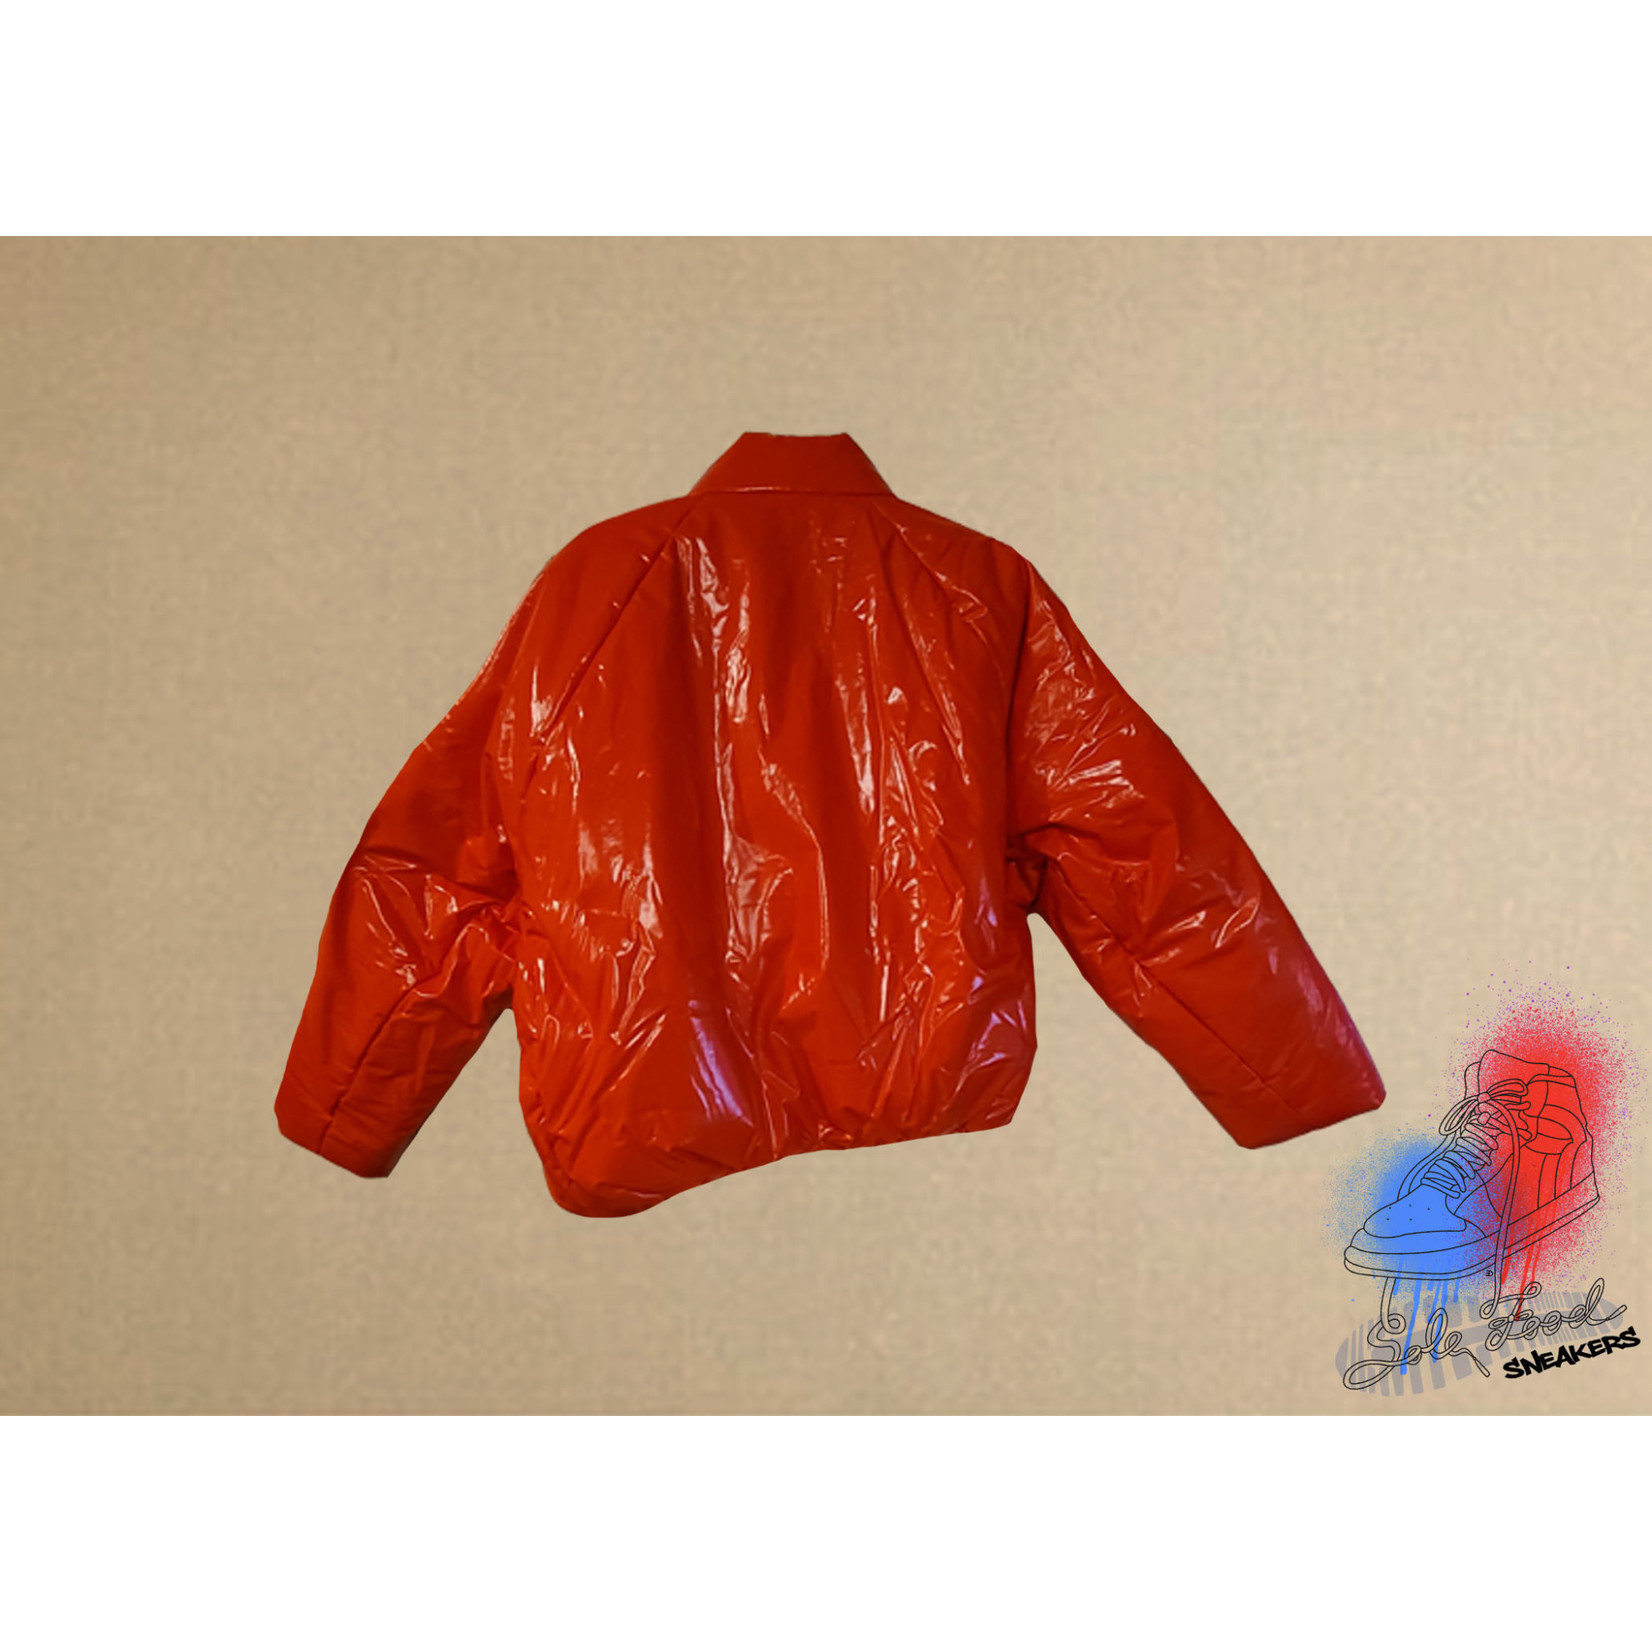 Yeezy x Gap Round Jacket Red - Sole Food Sneakers